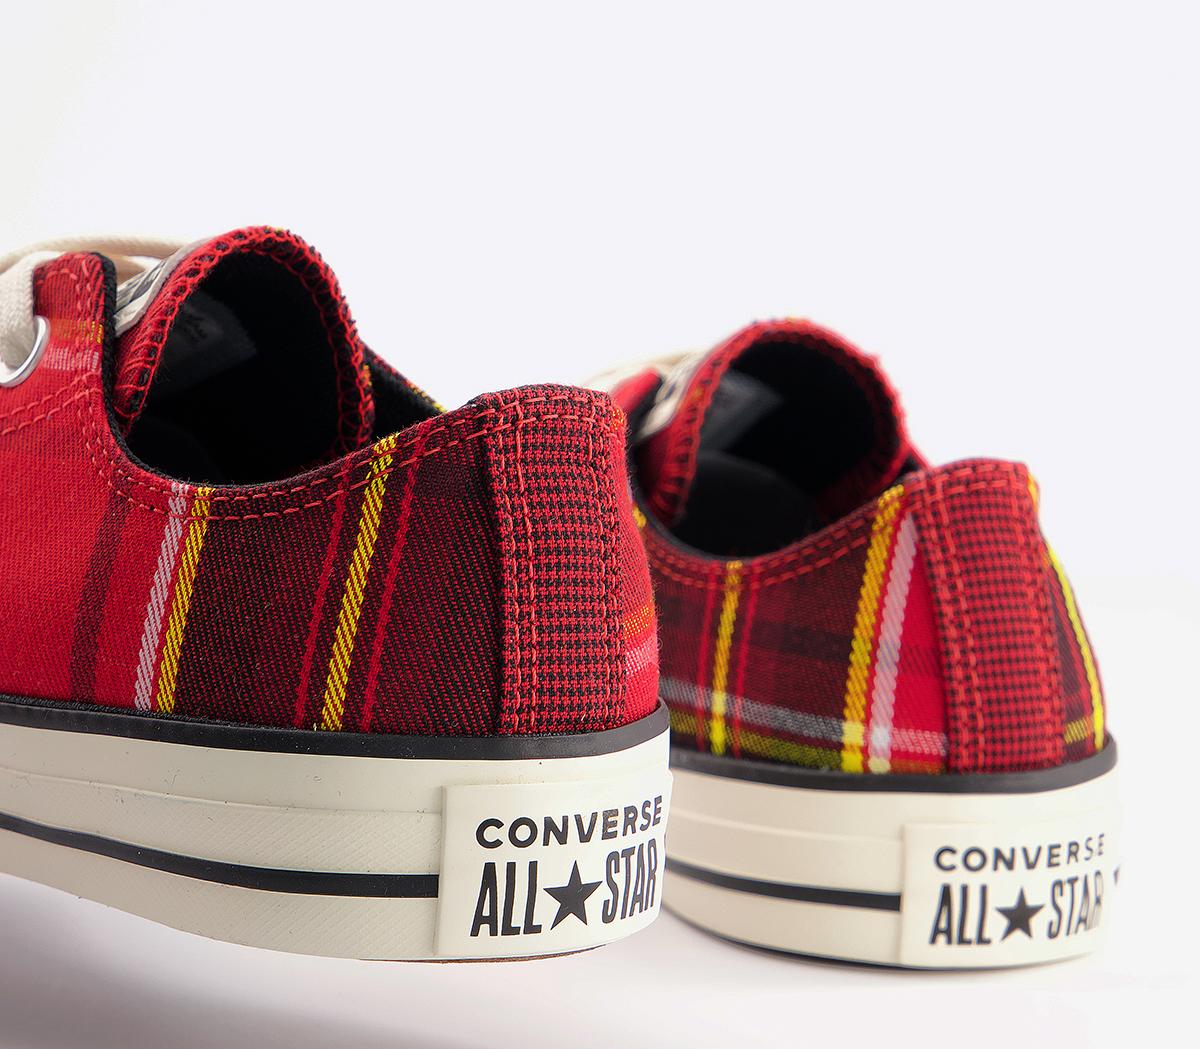 Converse Converse All Star Low Trainers University Red Black Egret ...